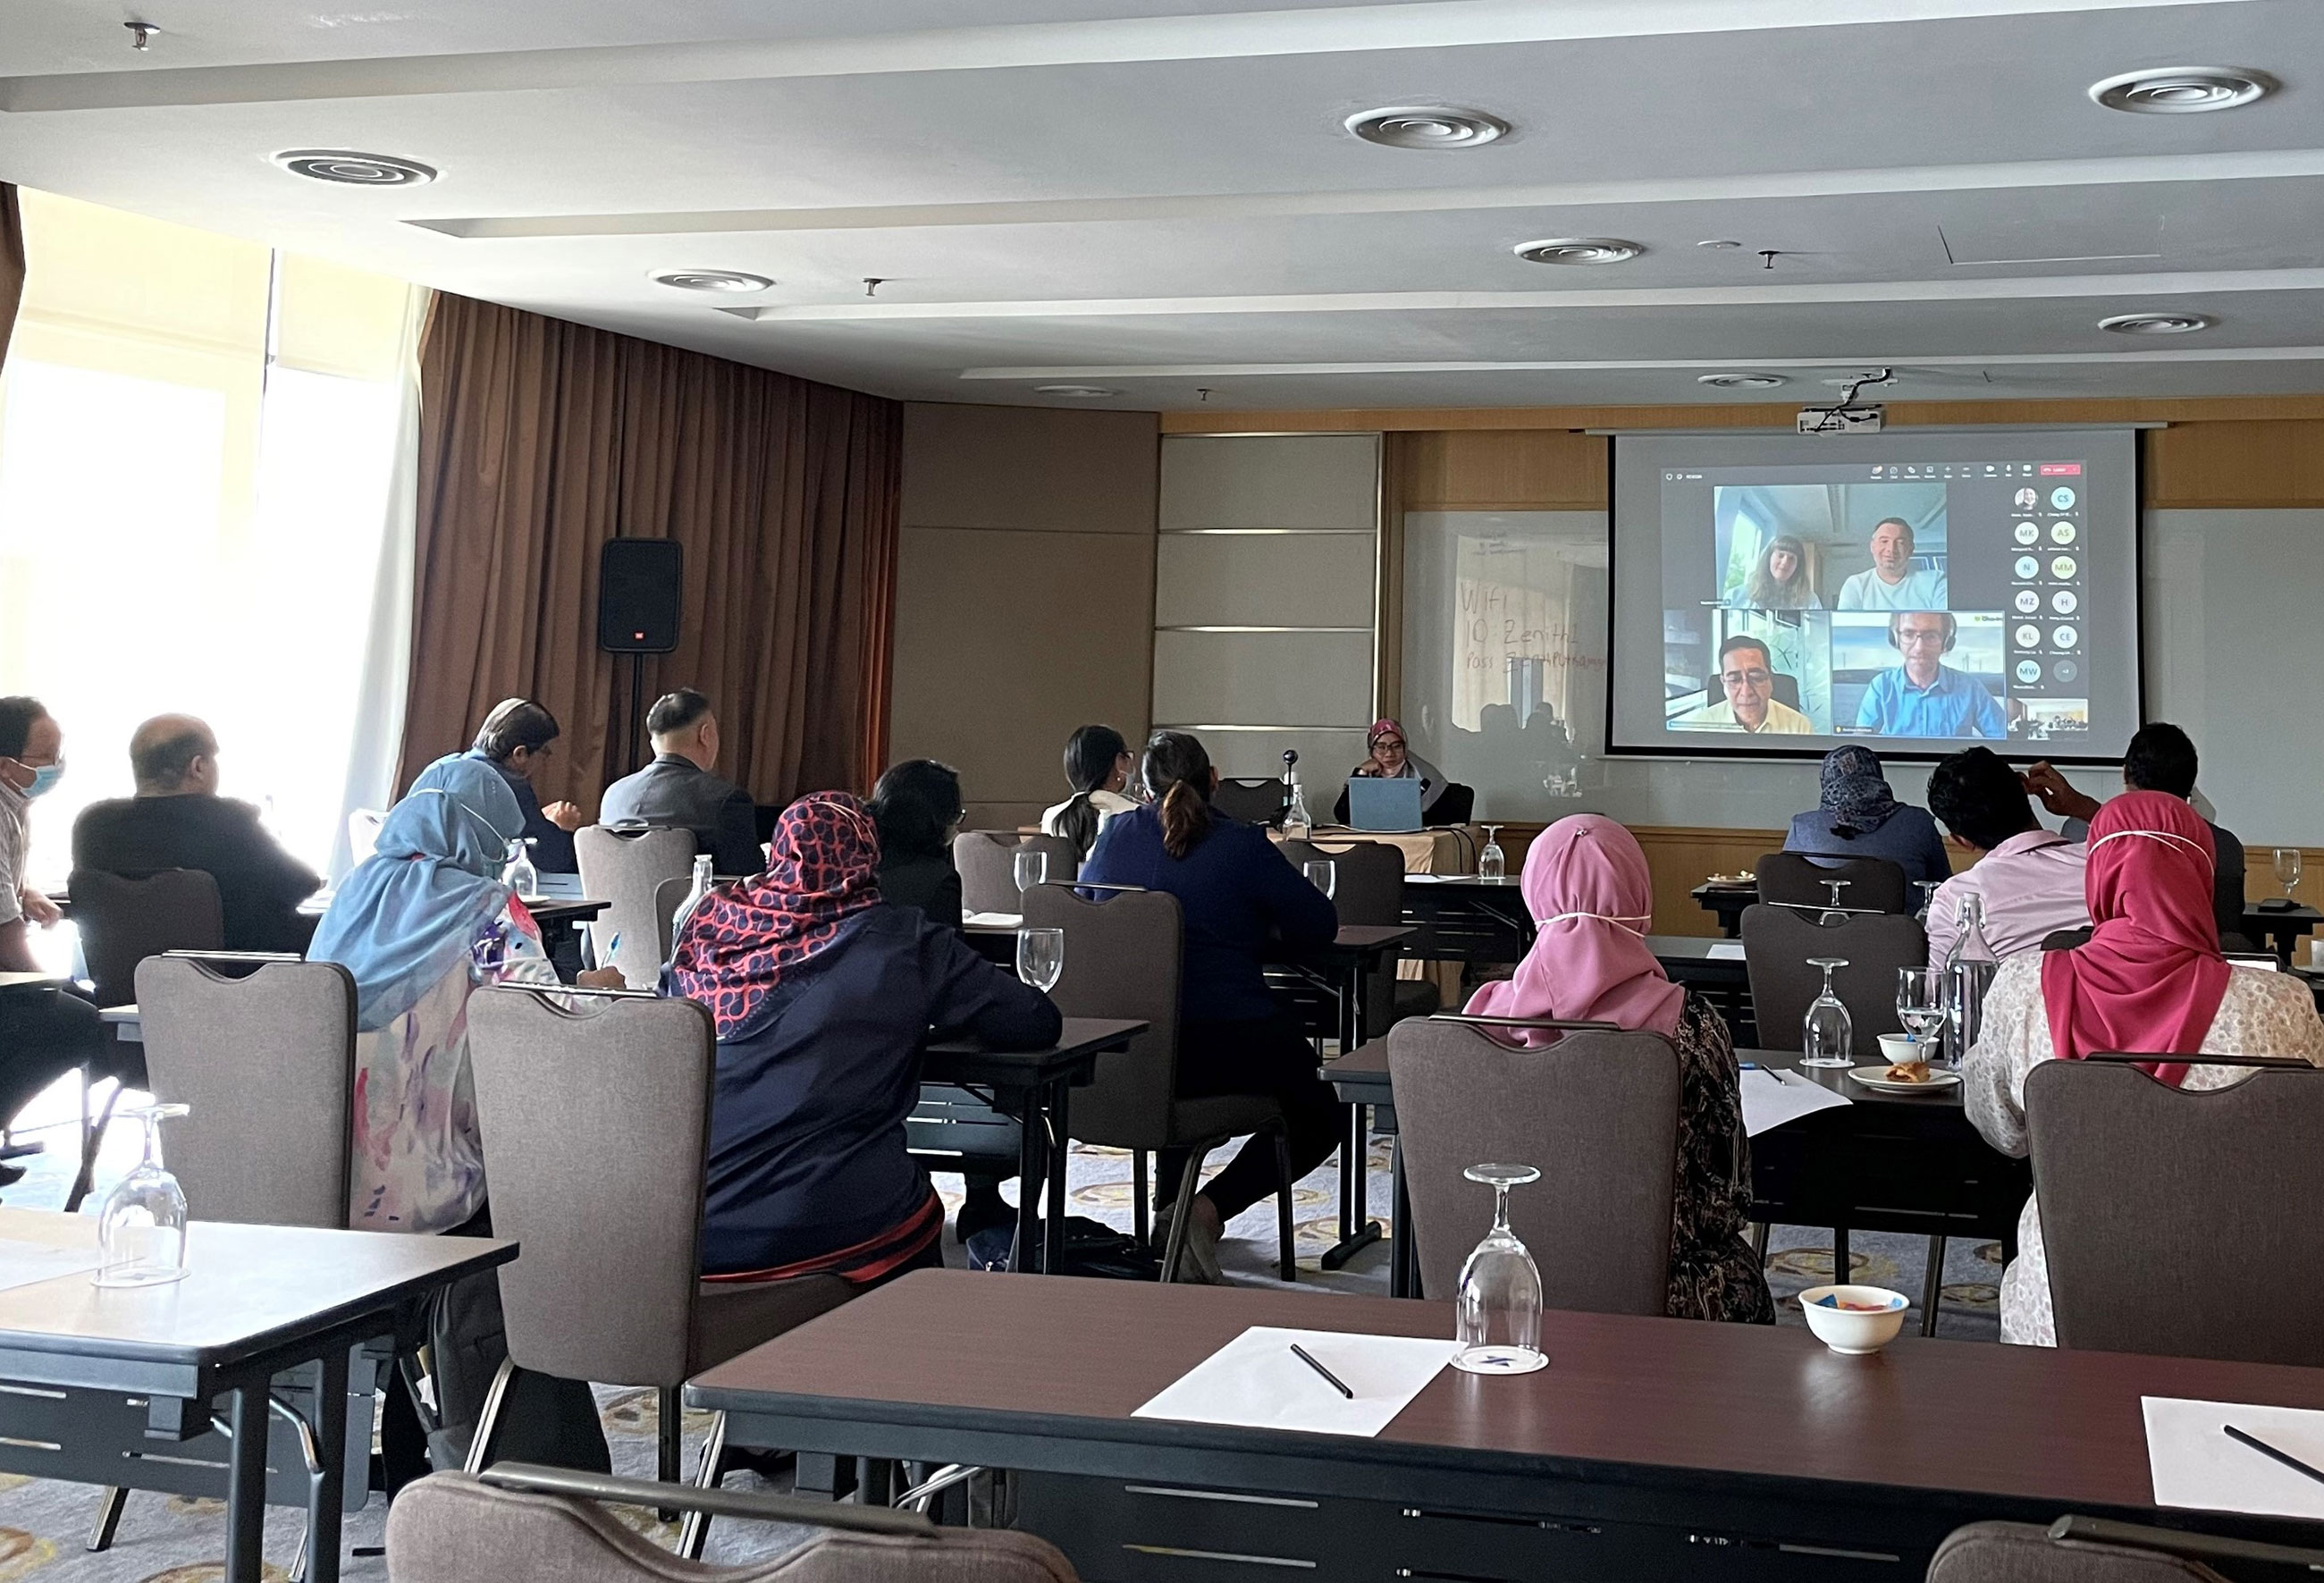 Technical advisory training provided to policymakers from Ministry of Housing and Local Government to draft EPR Policy Framework for Malaysia. (Photo: Nadirah Abd Manaf, GIZ)